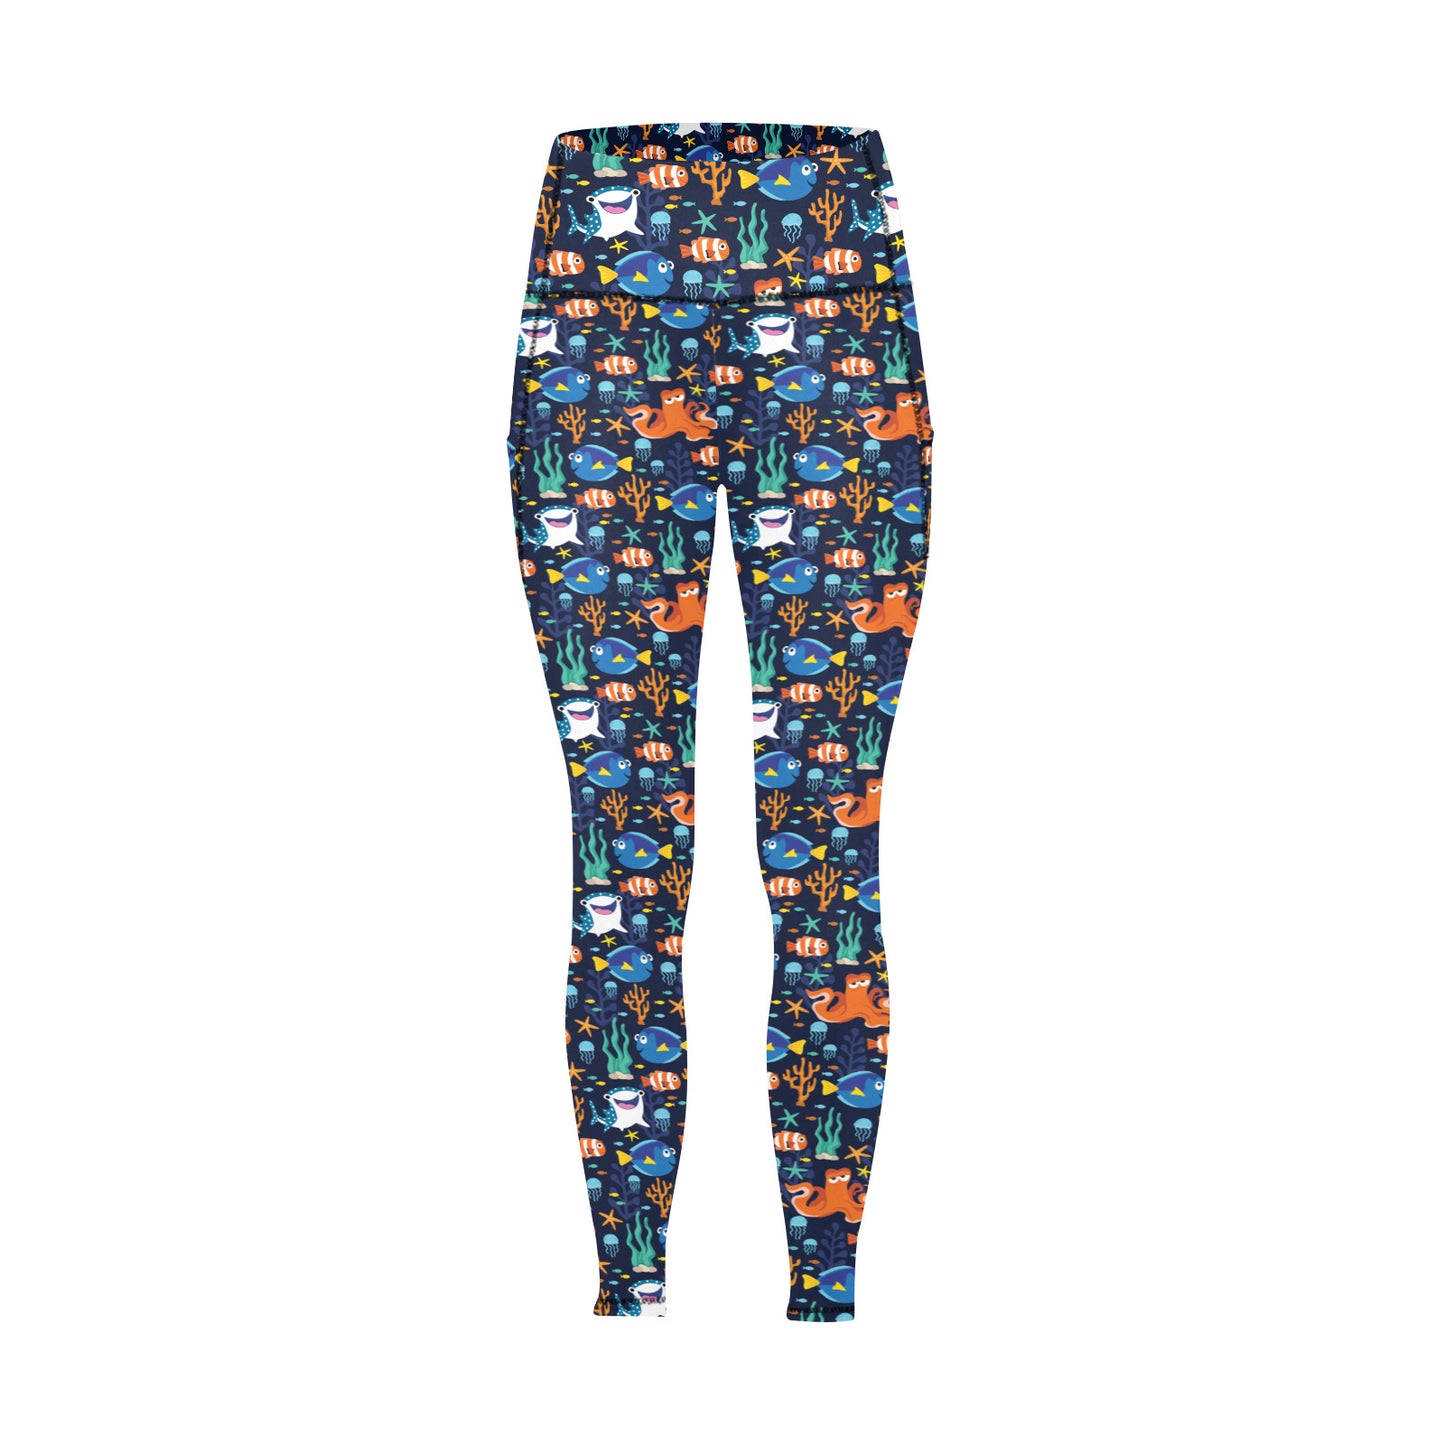 Dory Women's Athletic Leggings With Pockets